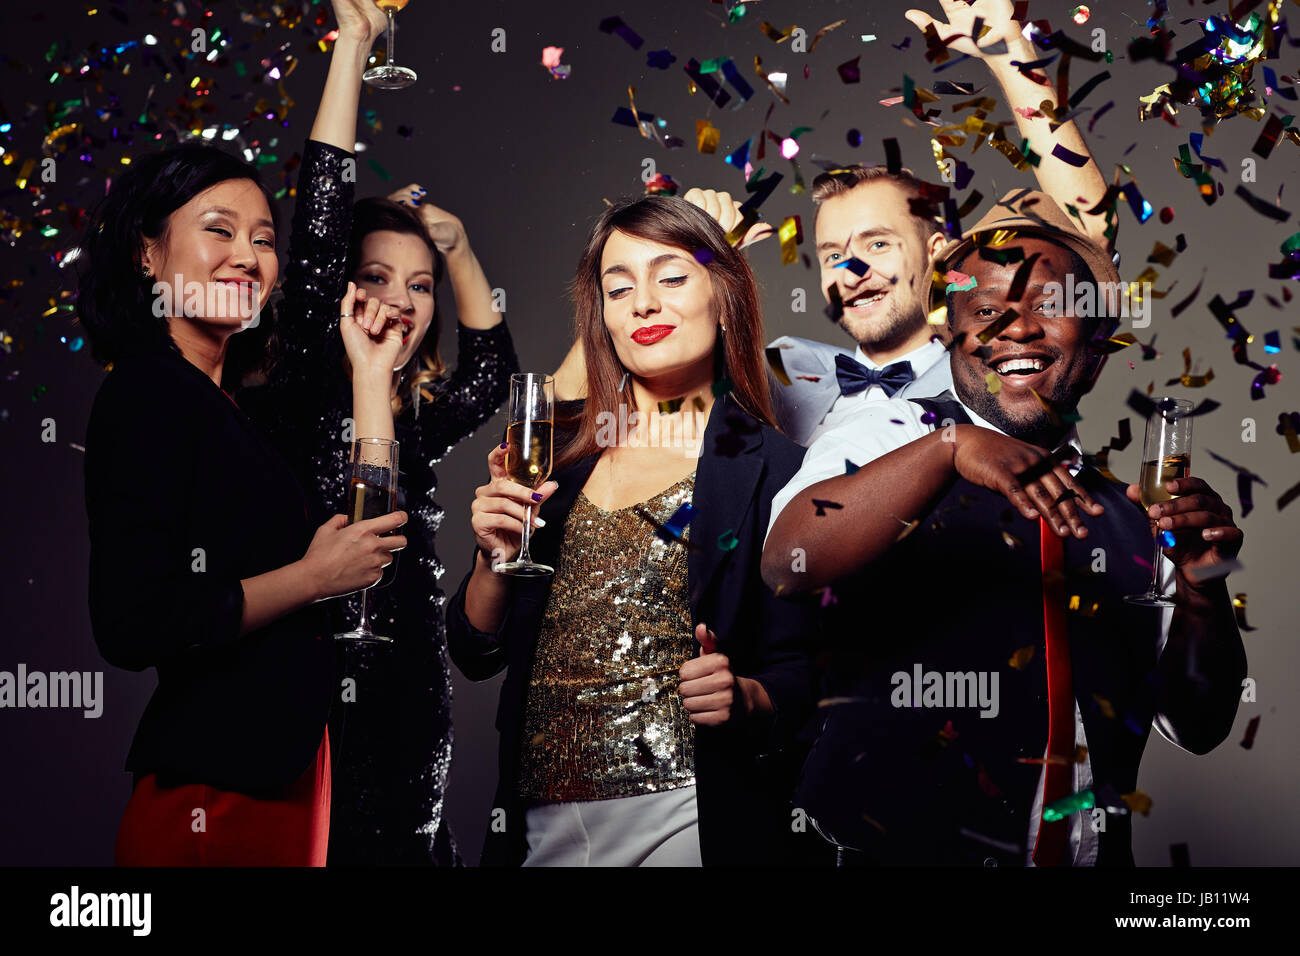 Its Time for Joyful Party! Stock Photo